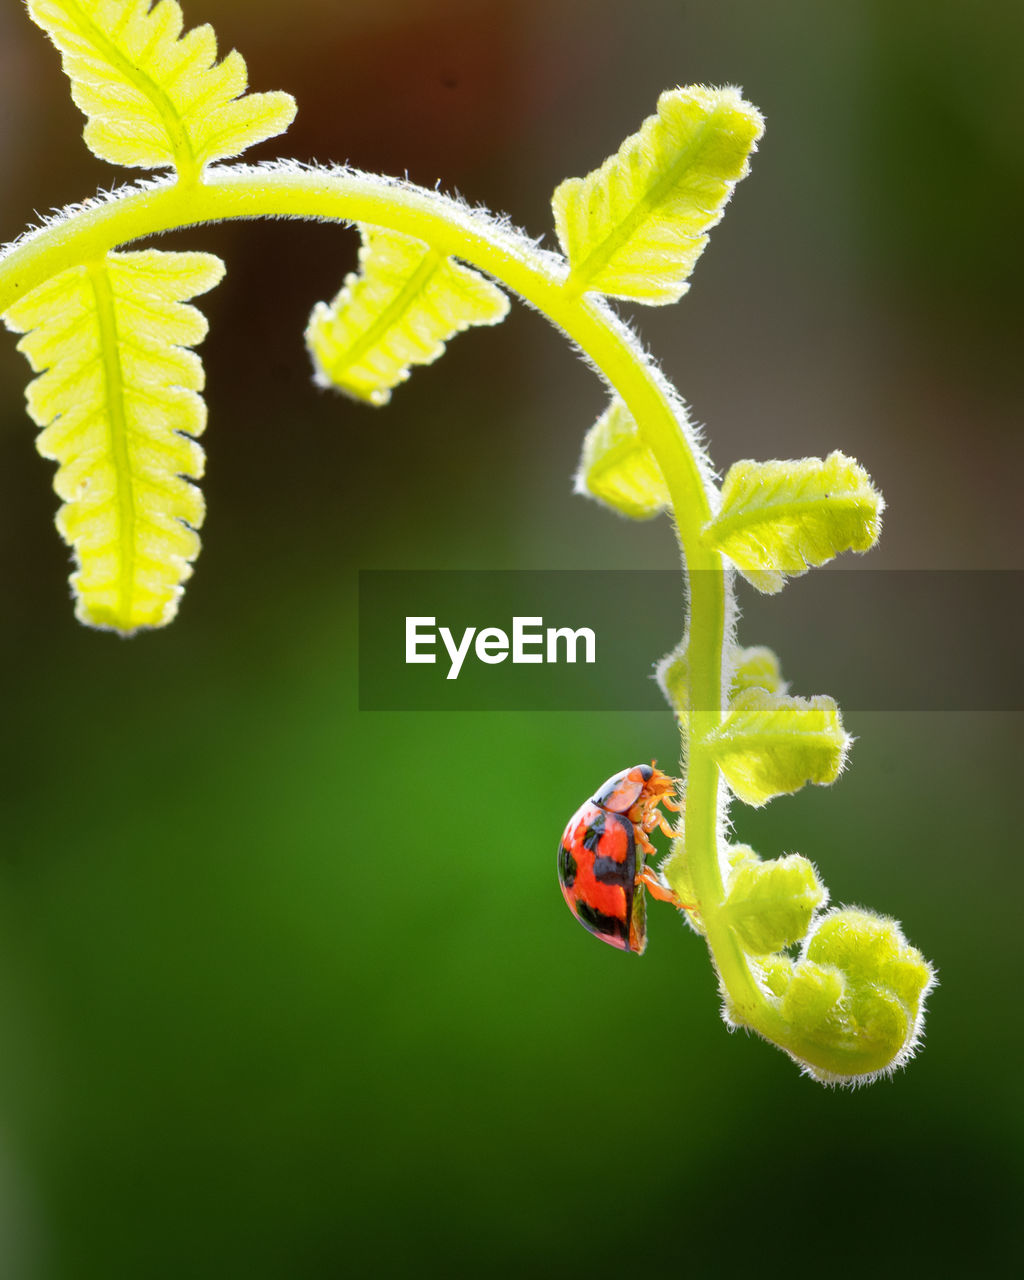 animal, animal themes, animal wildlife, insect, yellow, nature, one animal, leaf, plant, flower, wildlife, branch, close-up, macro photography, no people, green, beauty in nature, plant stem, outdoors, plant part, magnification, ladybug, colored background, beetle, focus on foreground